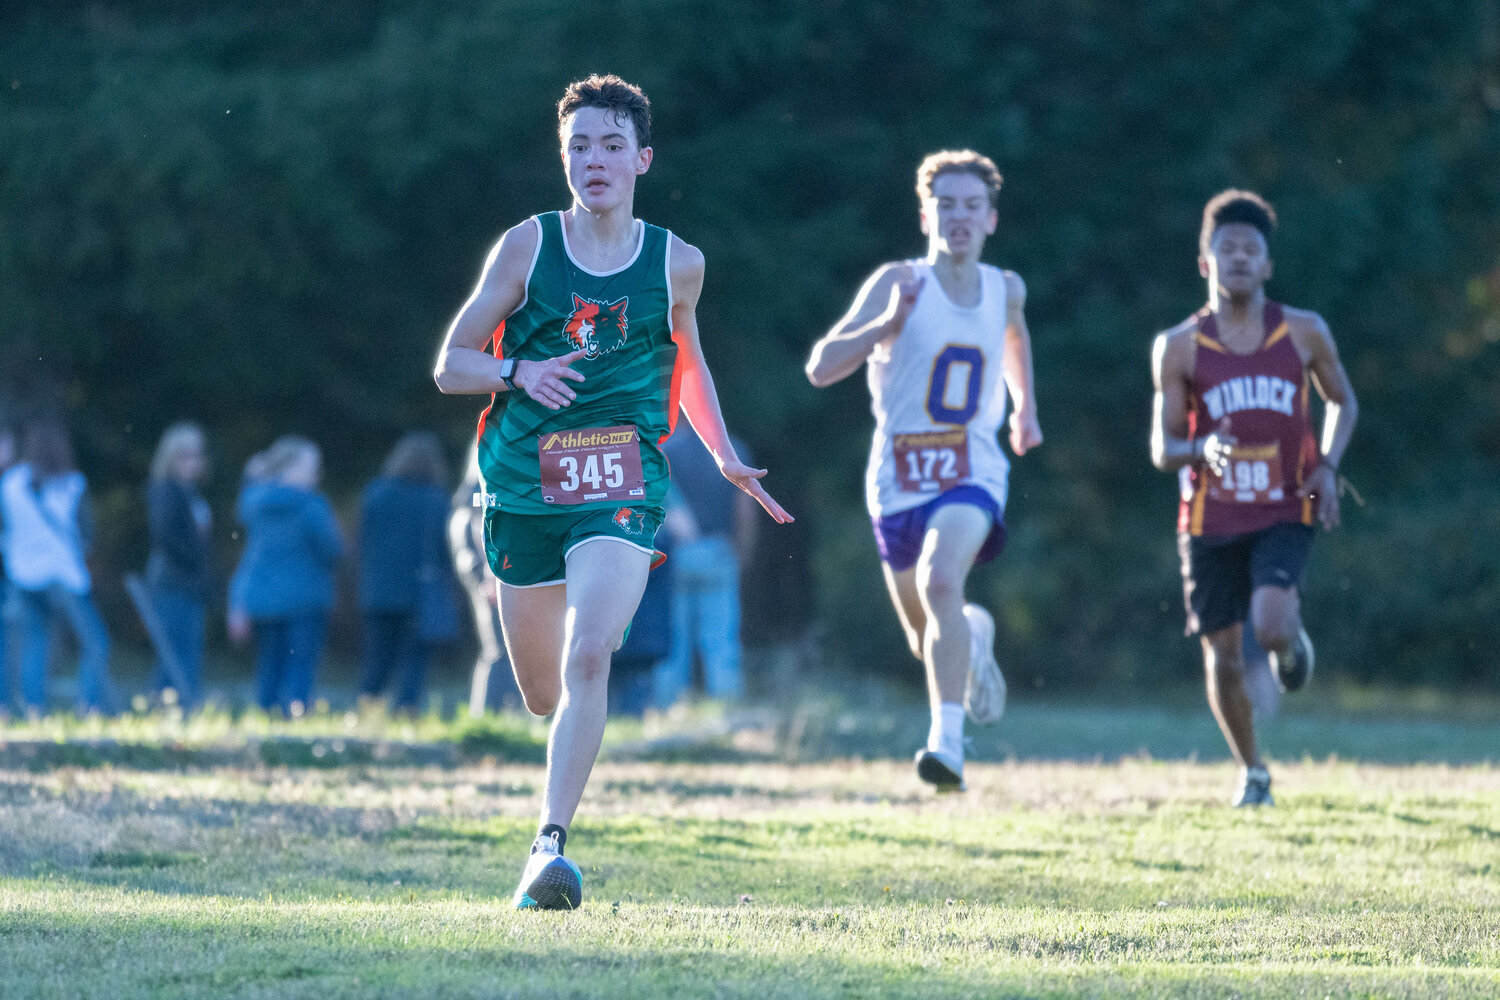 MWP's Aiden Kampa races toward the finish line, just ahead of Onalaska's Cole Russon and Winlock's Xavier Sancho-Carillo at the C2BL championship meet on Oct. 19 in Onalaska.